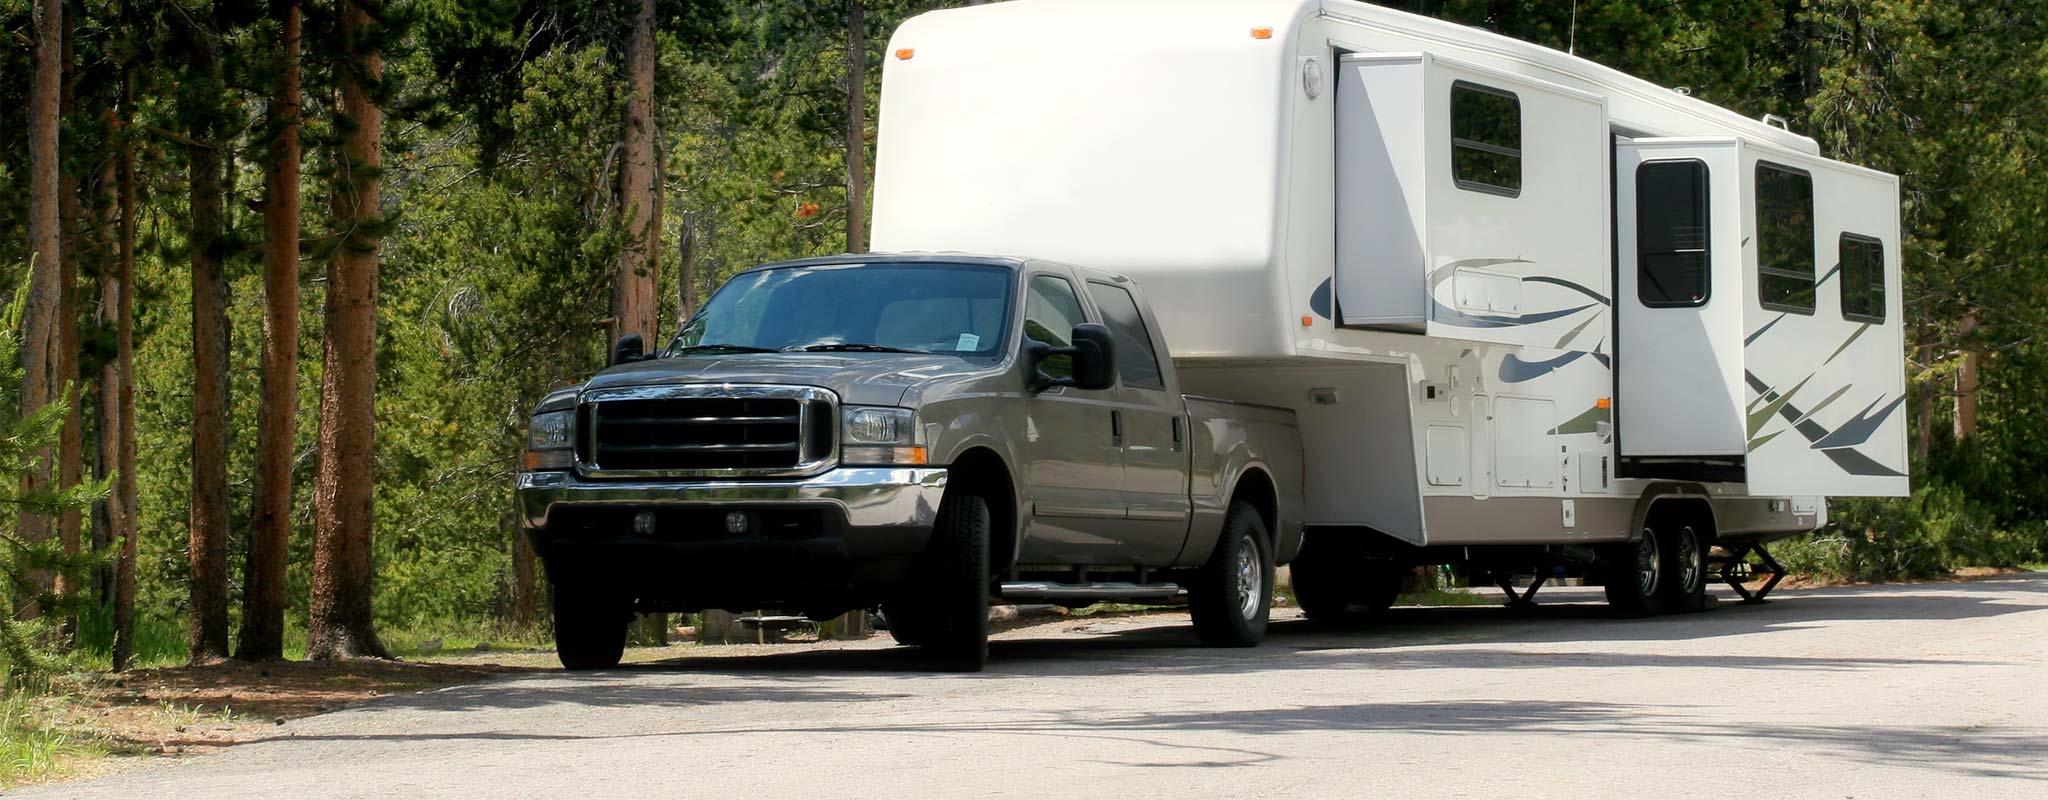 A truck and travel trailer parked in a forested campground.